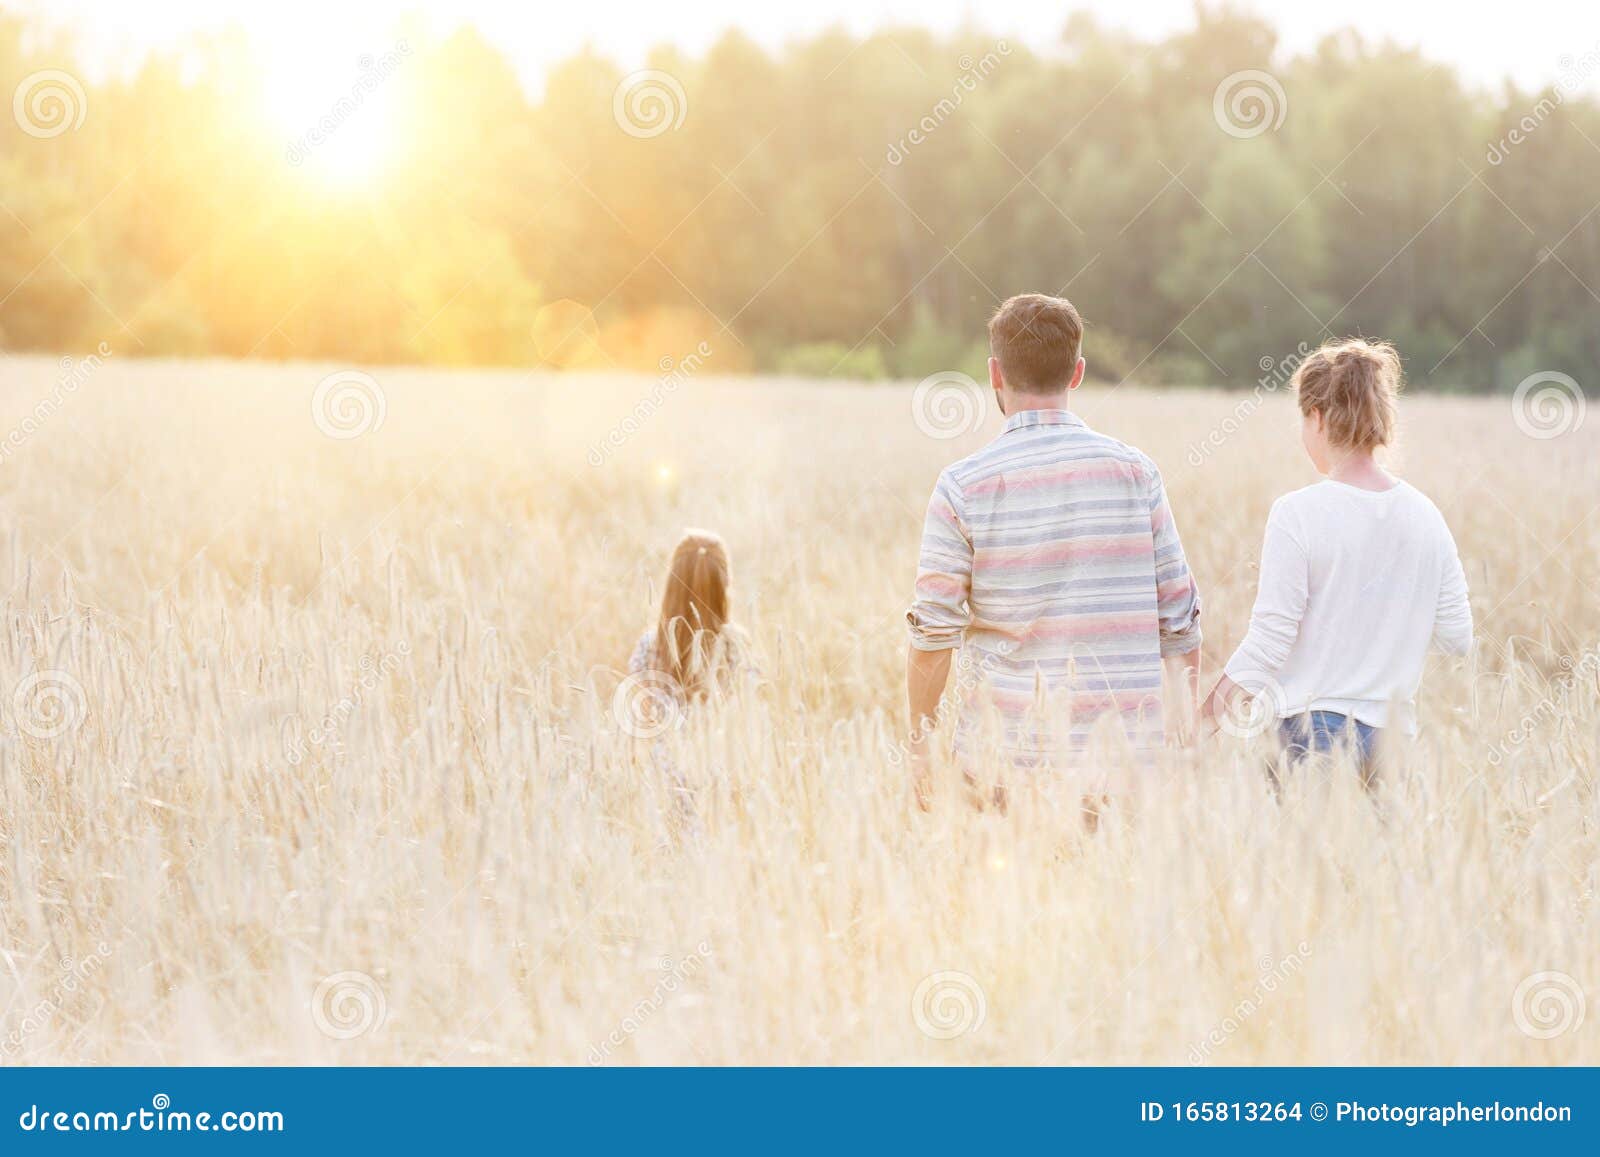 young caucasian family walking across field with young girl holding bouquet of flowers, concept organic ecologically friendly fami